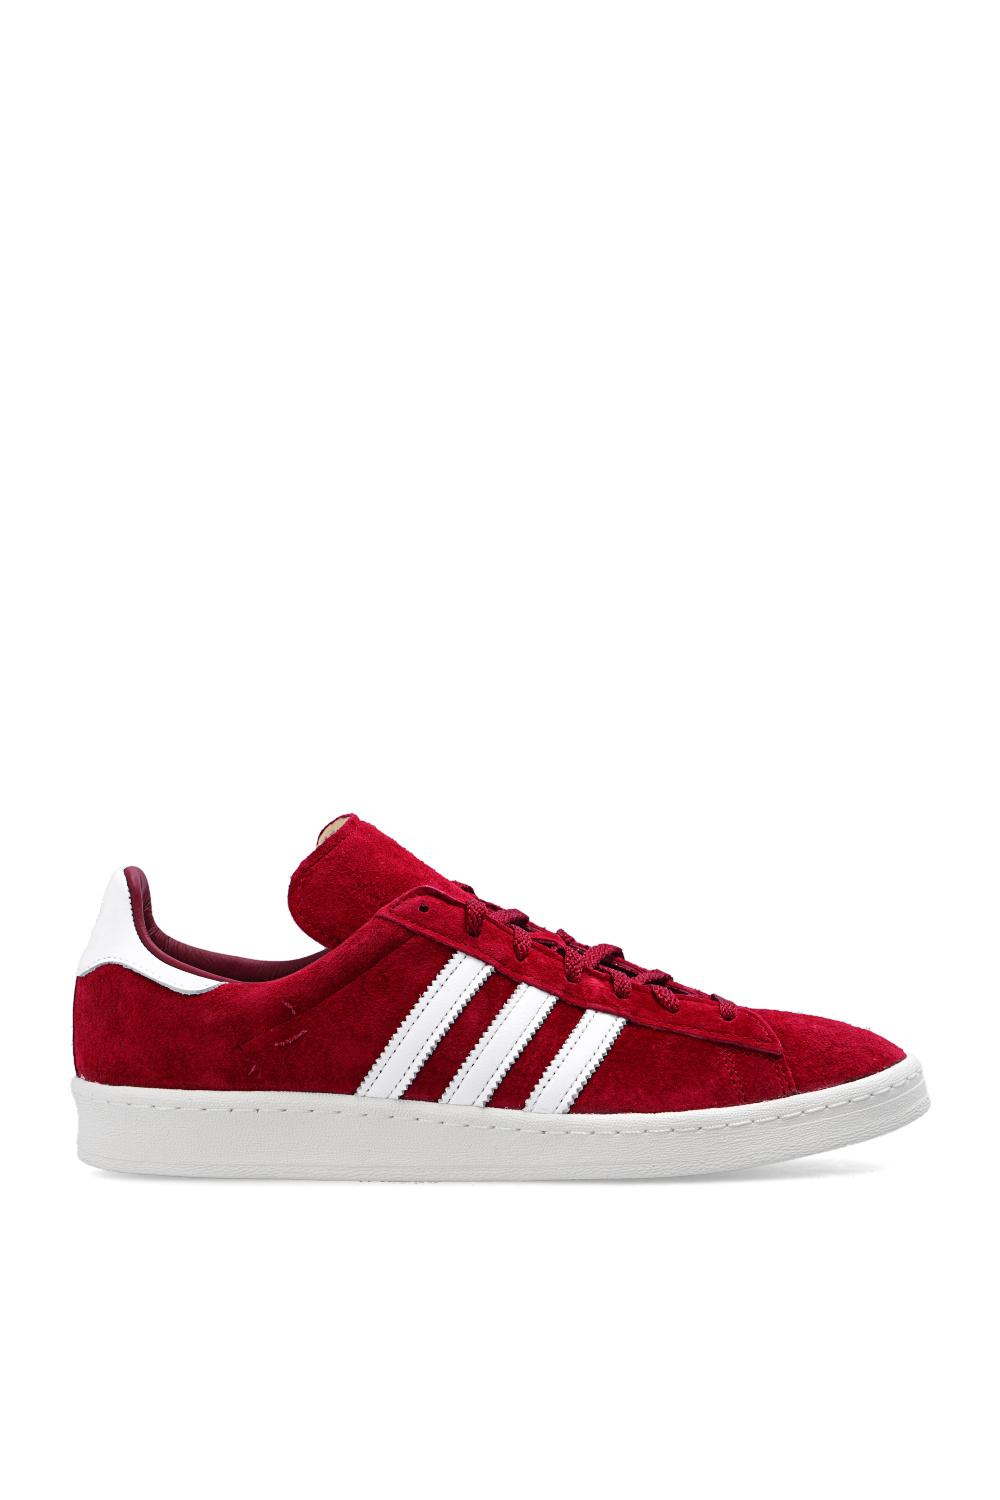 adidas Originals Leather 'campus 80' Sneakers in Red for Men | Lyst